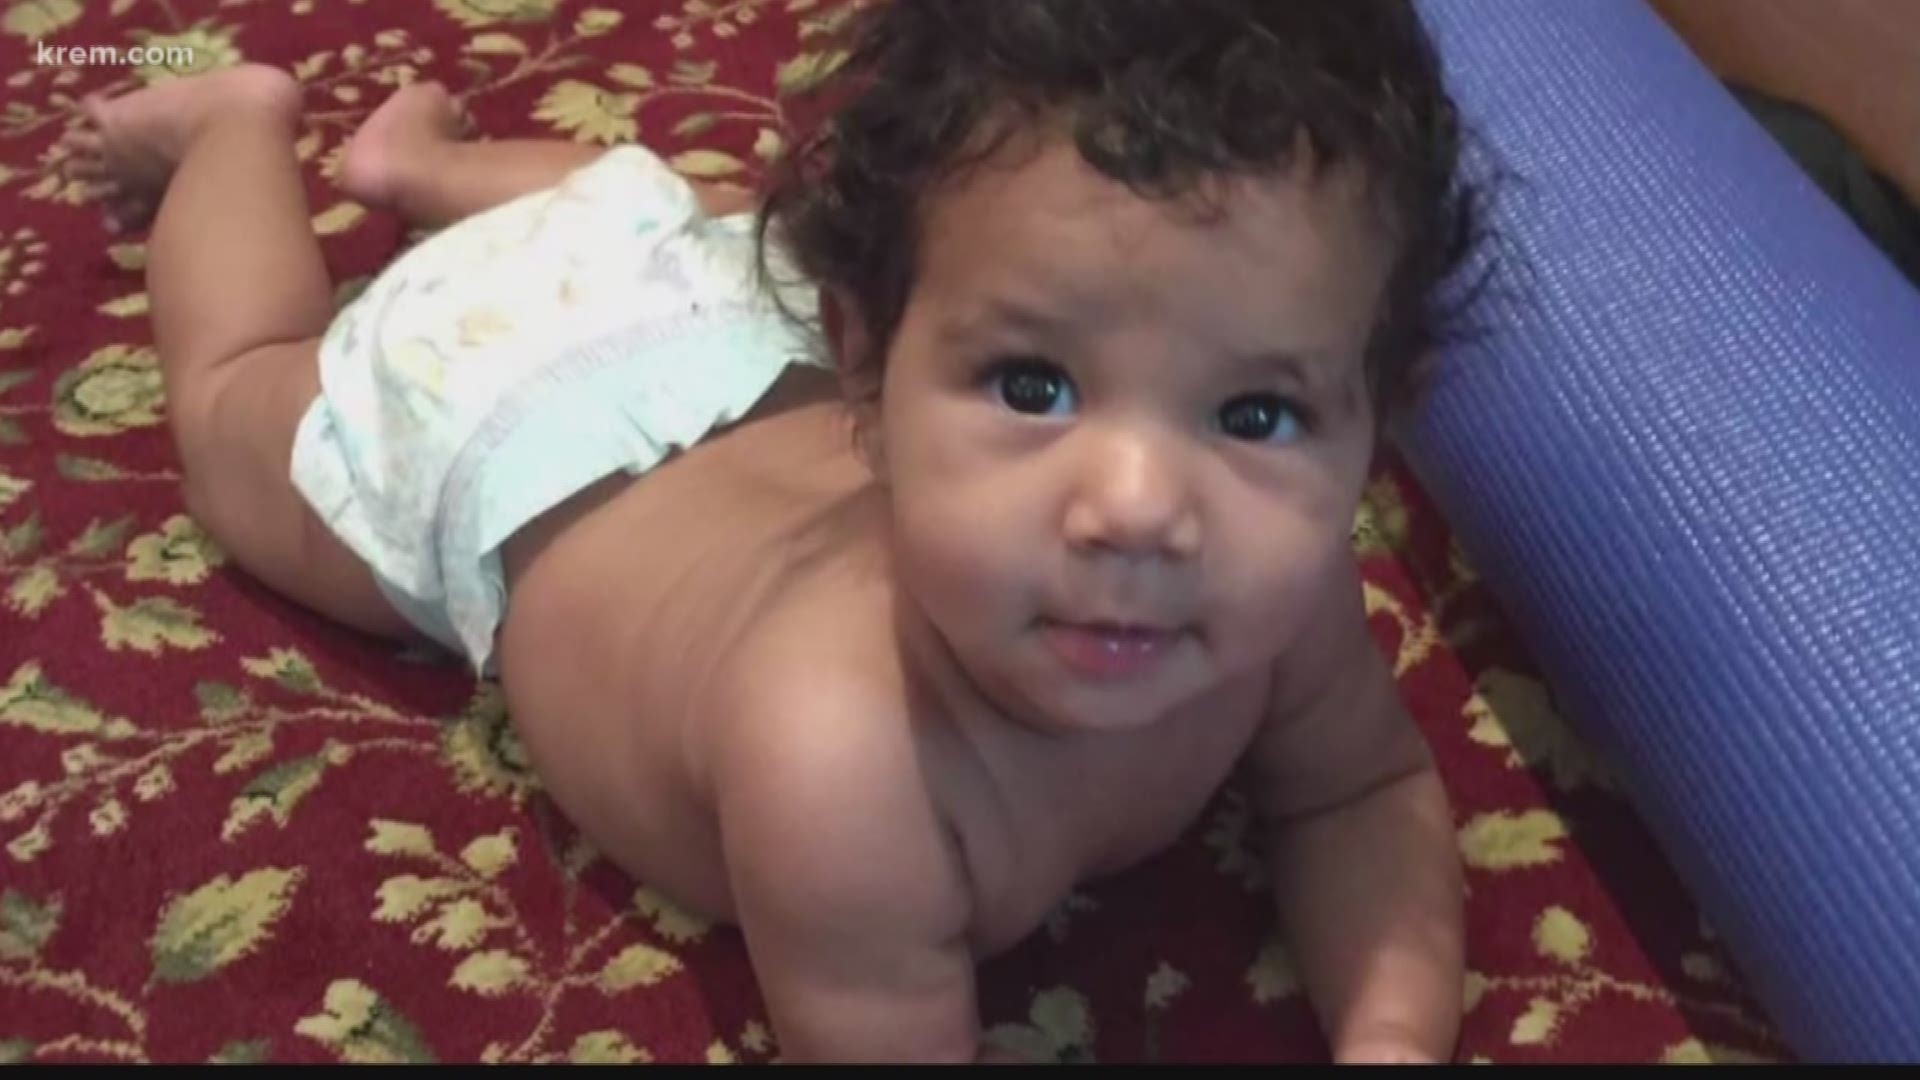 Closing arguments started Tuesday in the trial of a man accused of killing a 9-month-old baby.